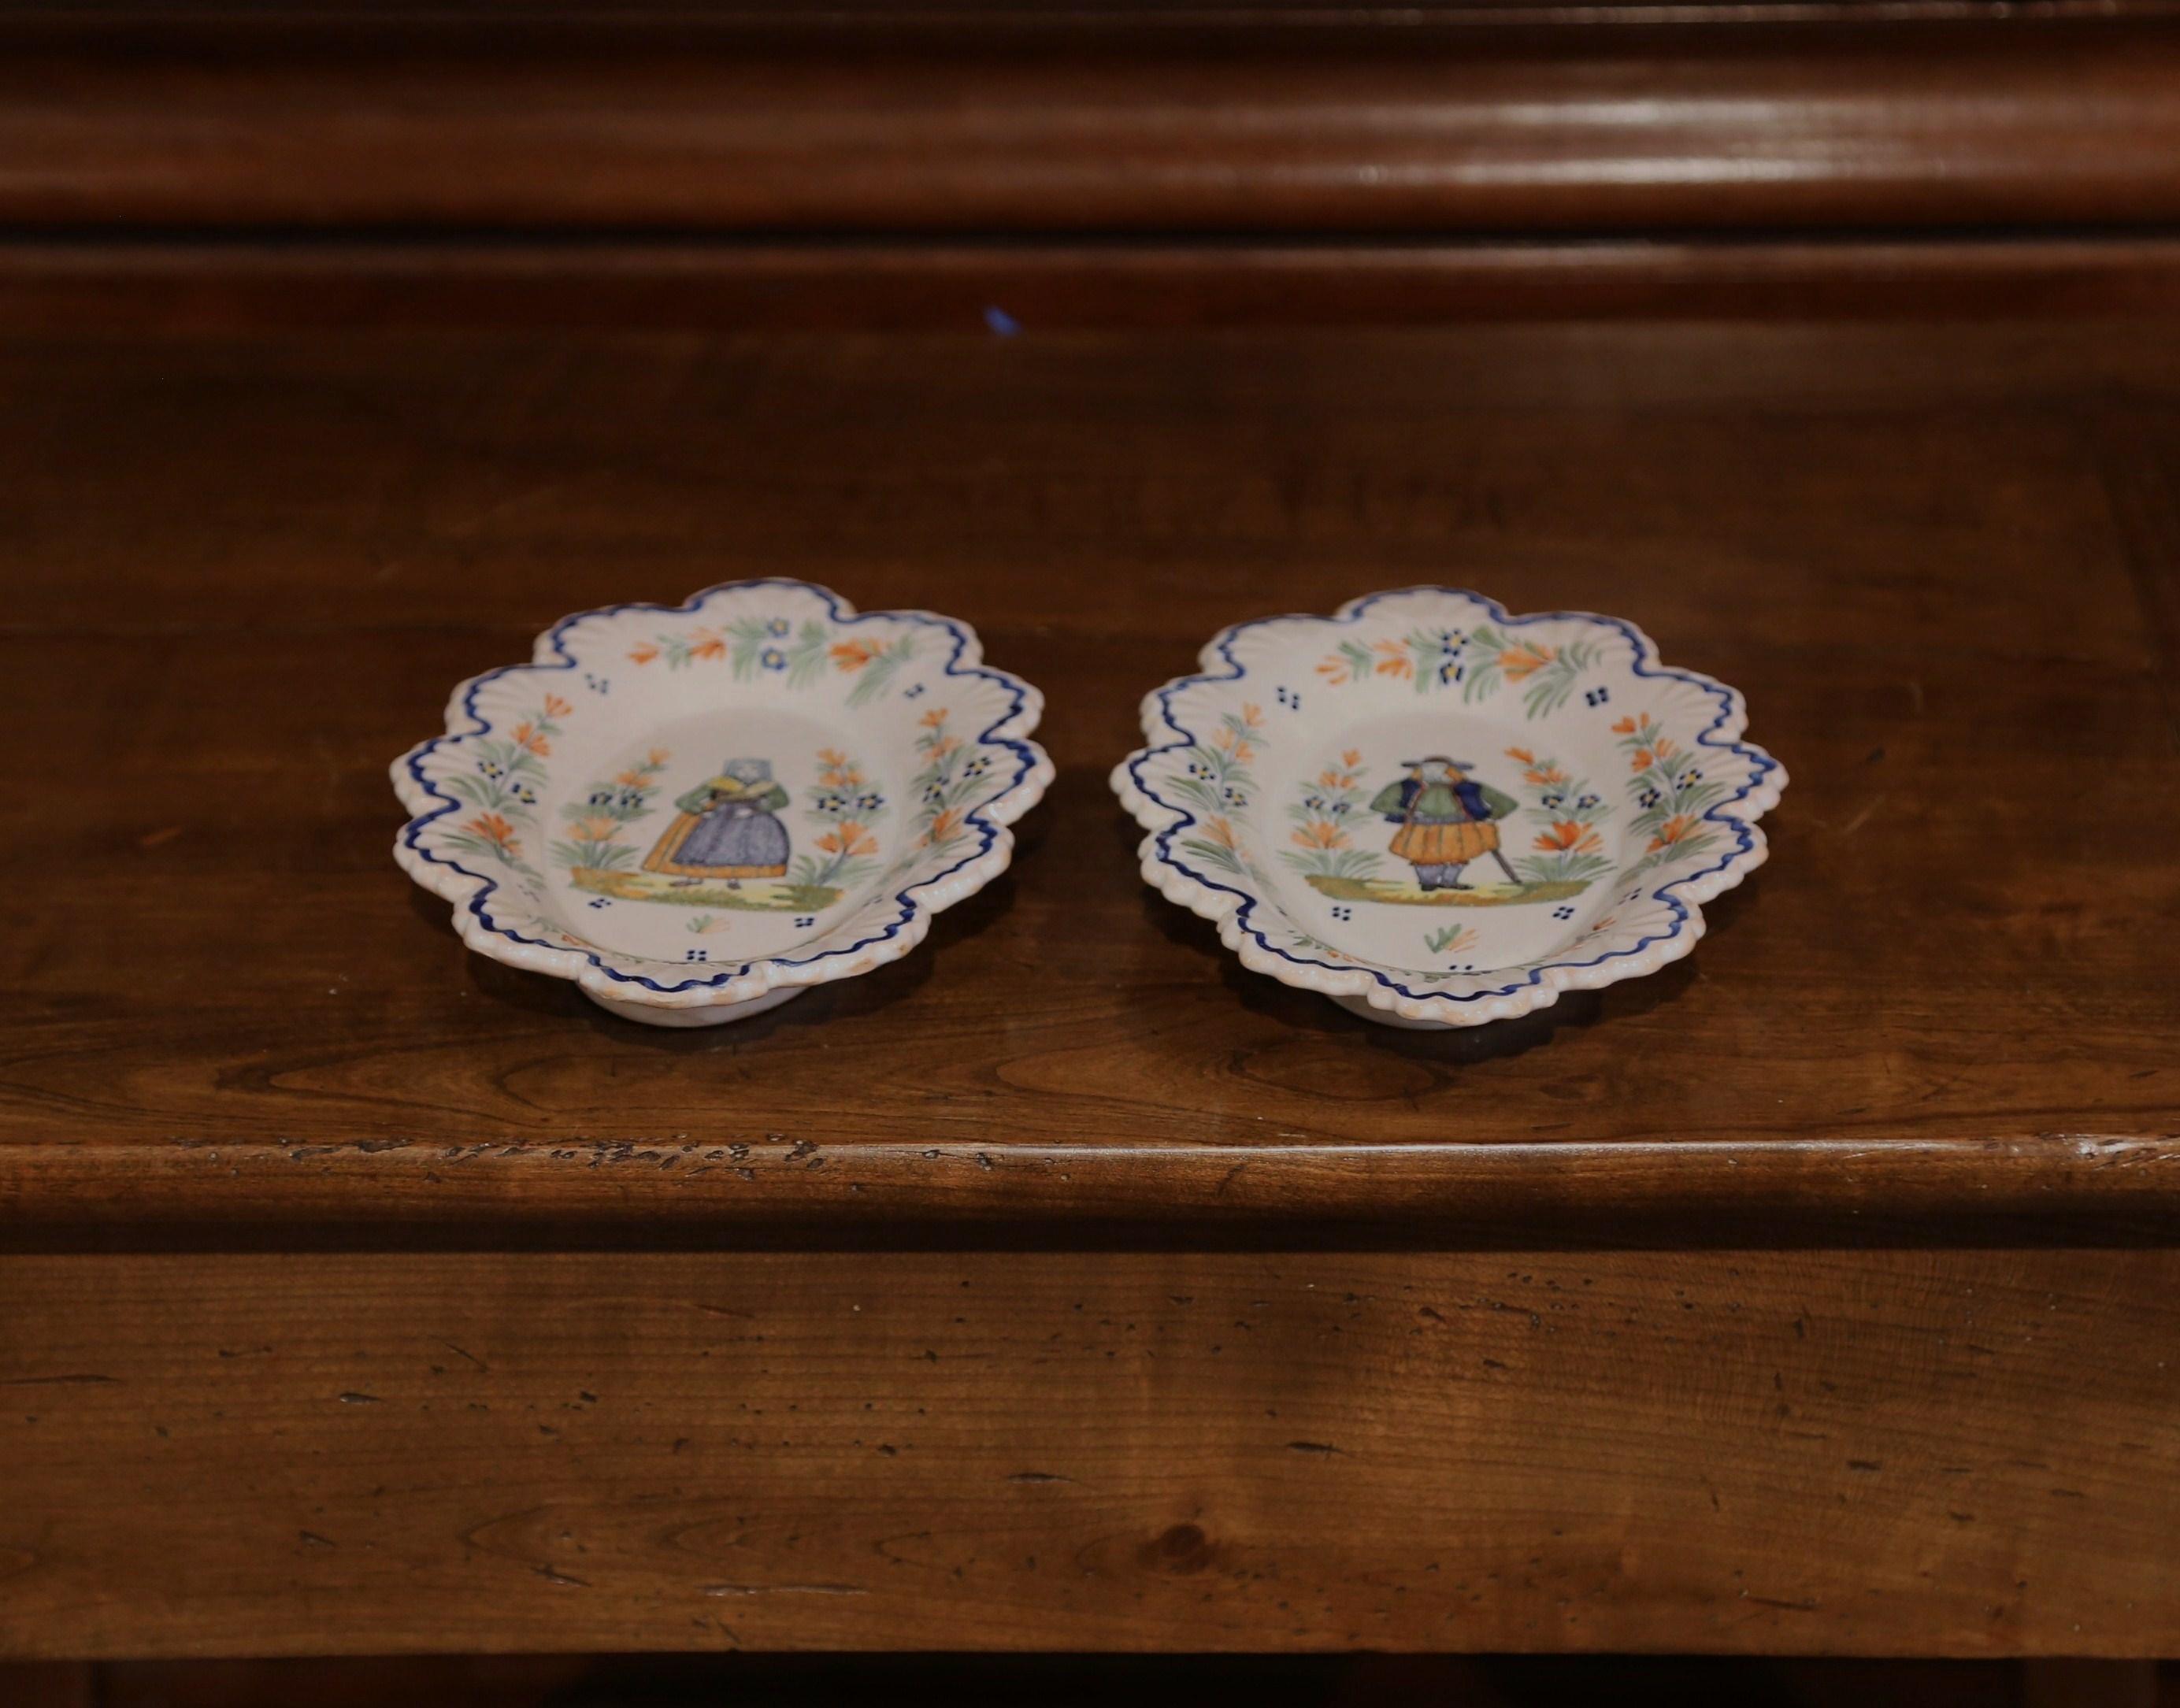 Pair of 19th Century French Faience Oval Wall Plates Signed Henriot Quimper (Fayence)